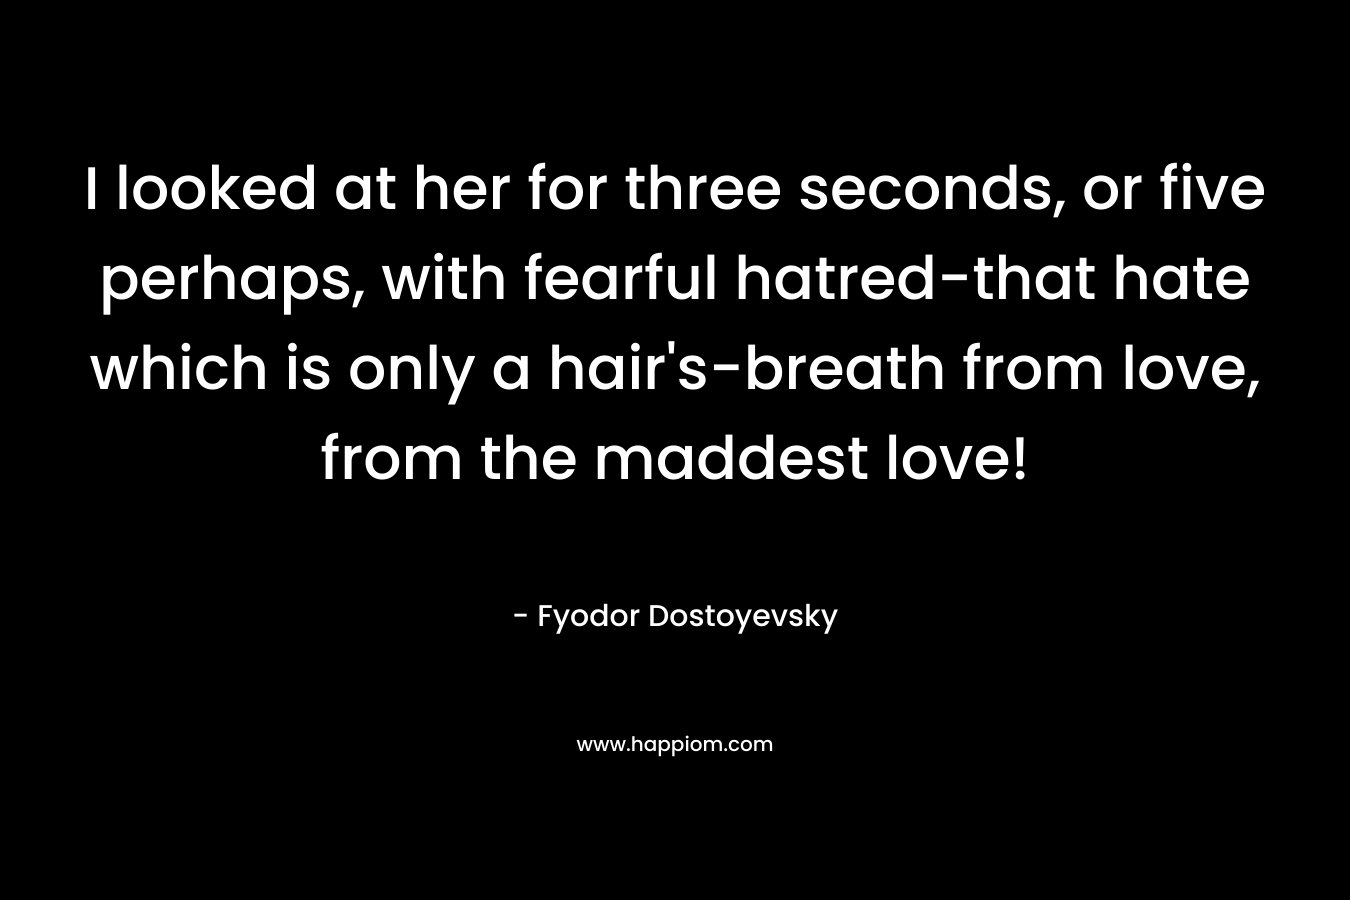 I looked at her for three seconds, or five perhaps, with fearful hatred-that hate which is only a hair’s-breath from love, from the maddest love! – Fyodor Dostoyevsky